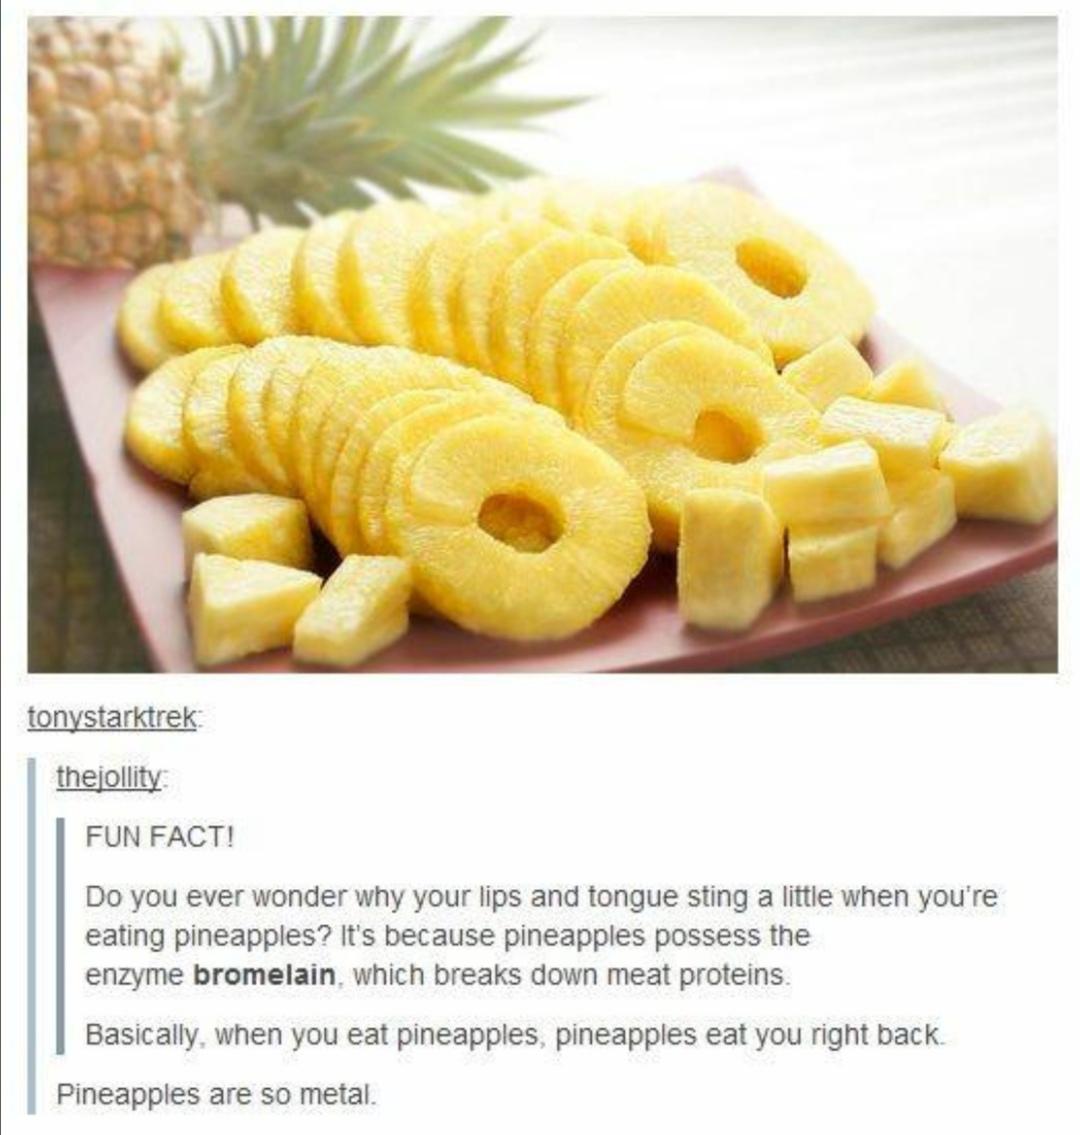 Pineapples are carnivores...